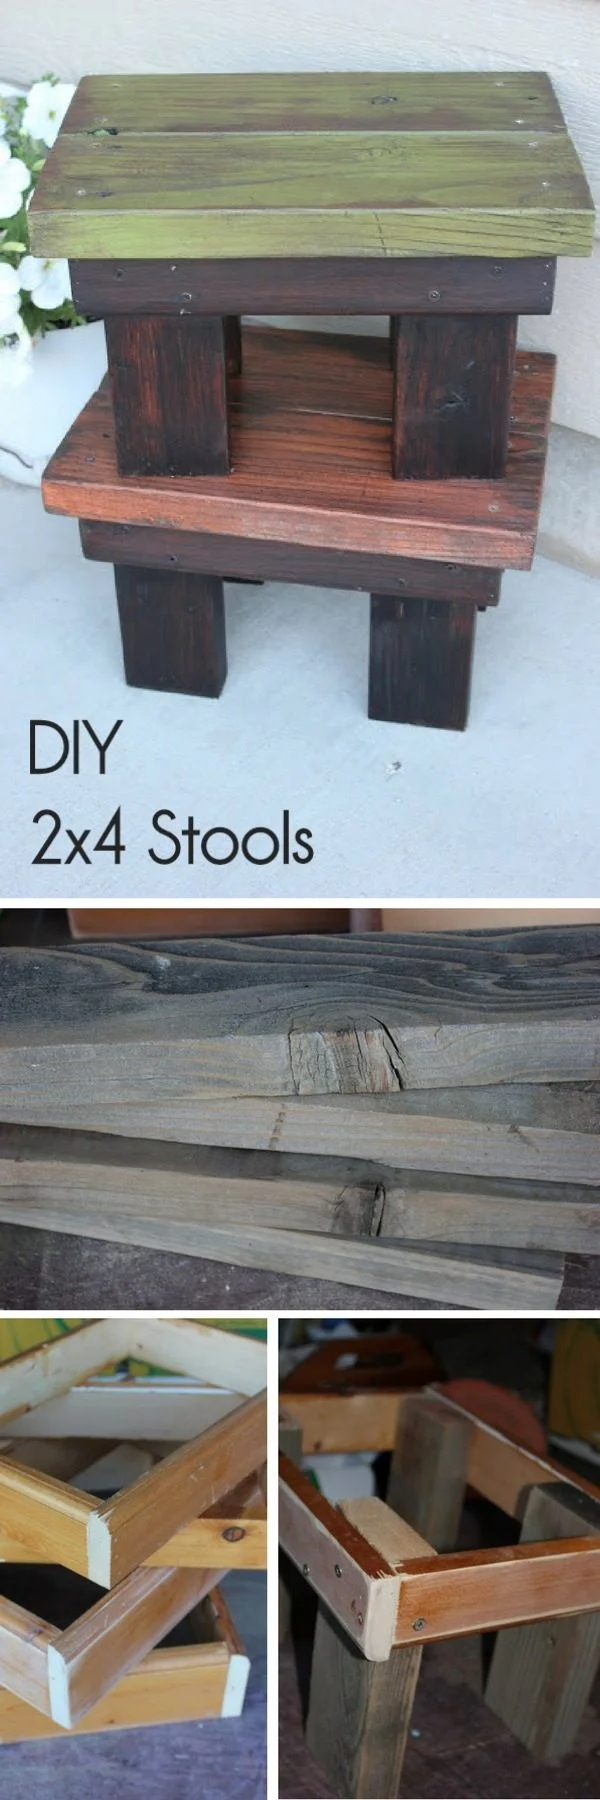 20 Crafty 2x4 DIY Projects That You Can Easily Make - Check out how to make   stools from 2x4s 